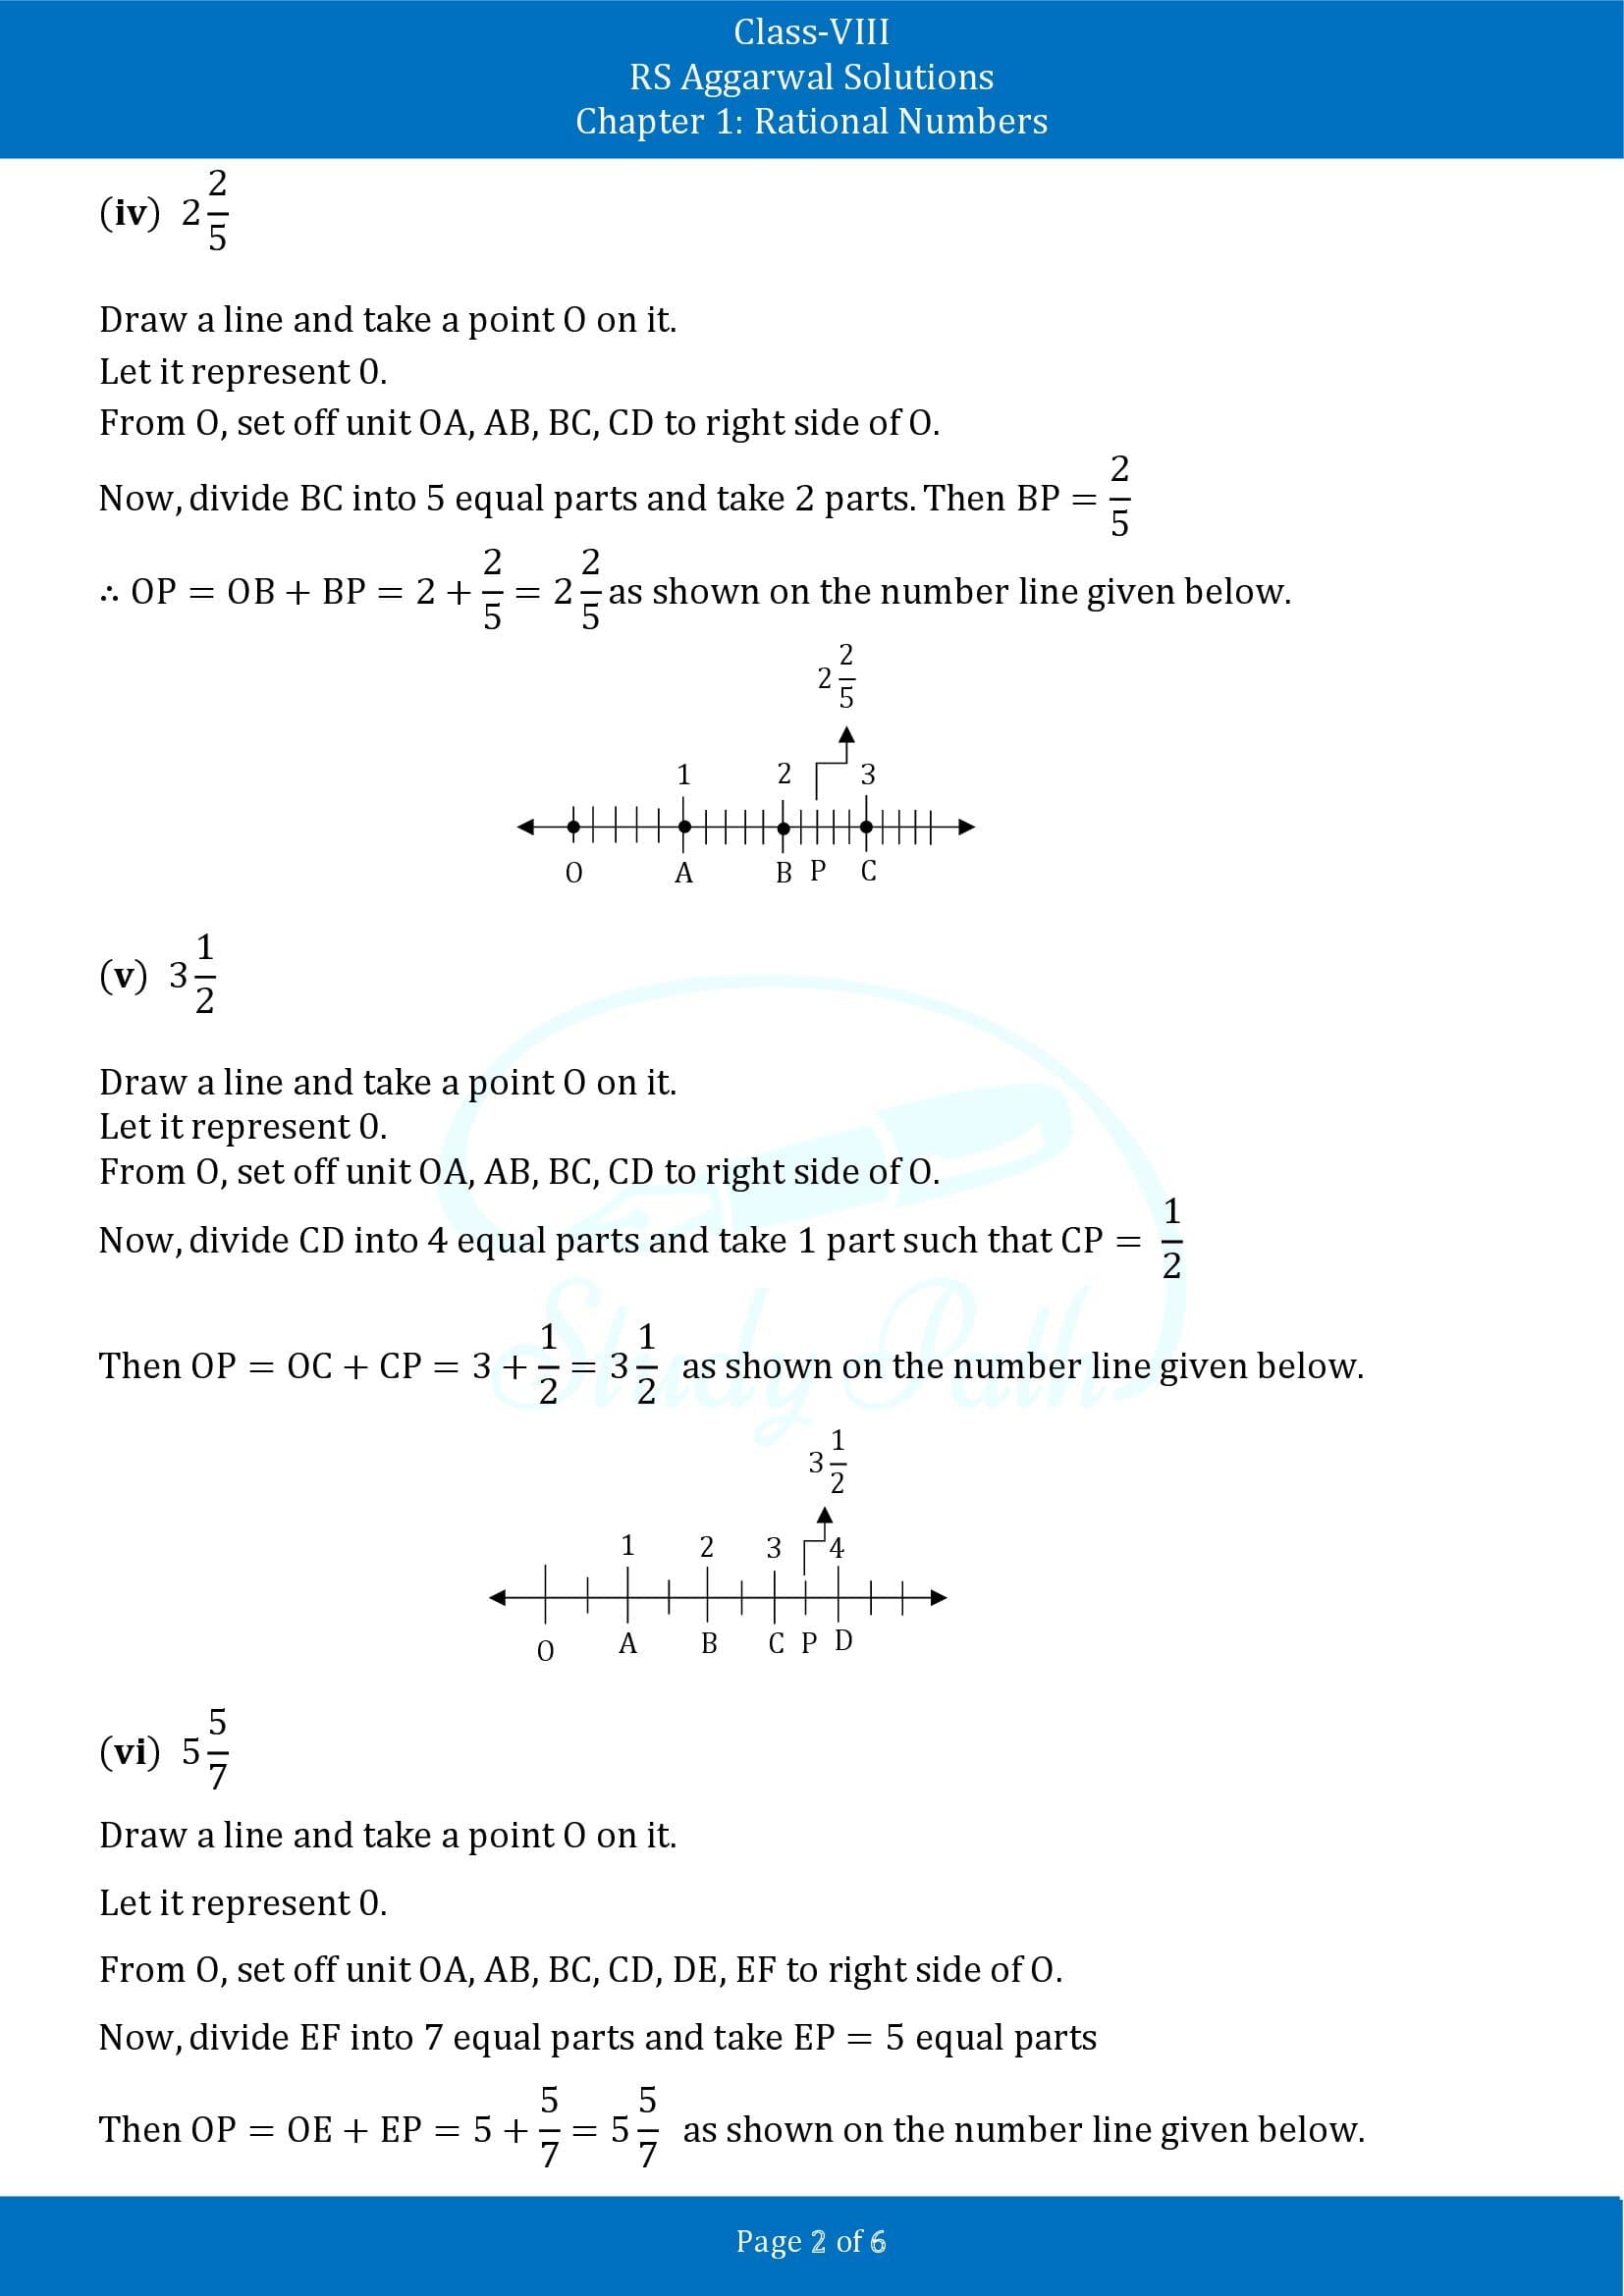 RS Aggarwal Solutions Class 8 Chapter 1 Rational Numbers Exercise 1B 00002